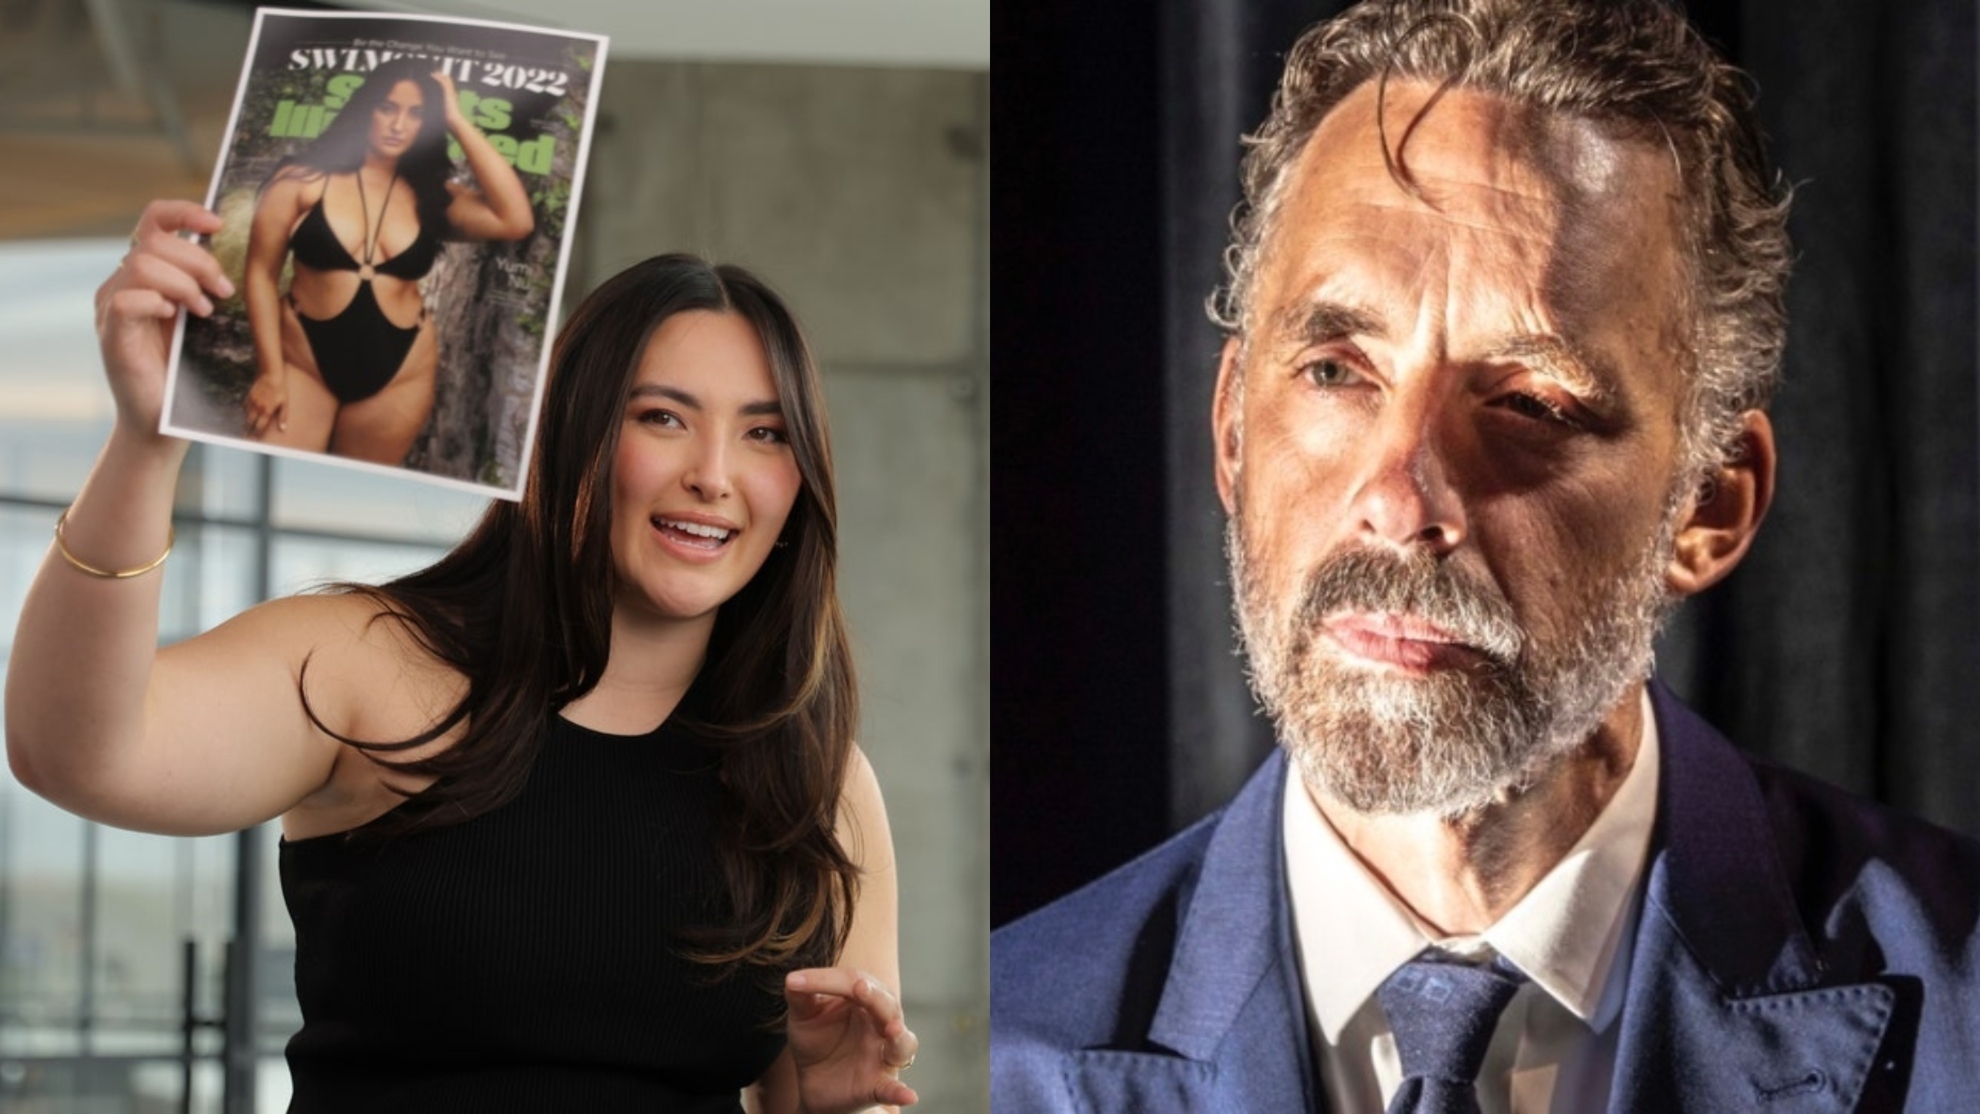 Plumber Blame inject Jordan Peterson's beef with Twitter and "political correctness" | Marca